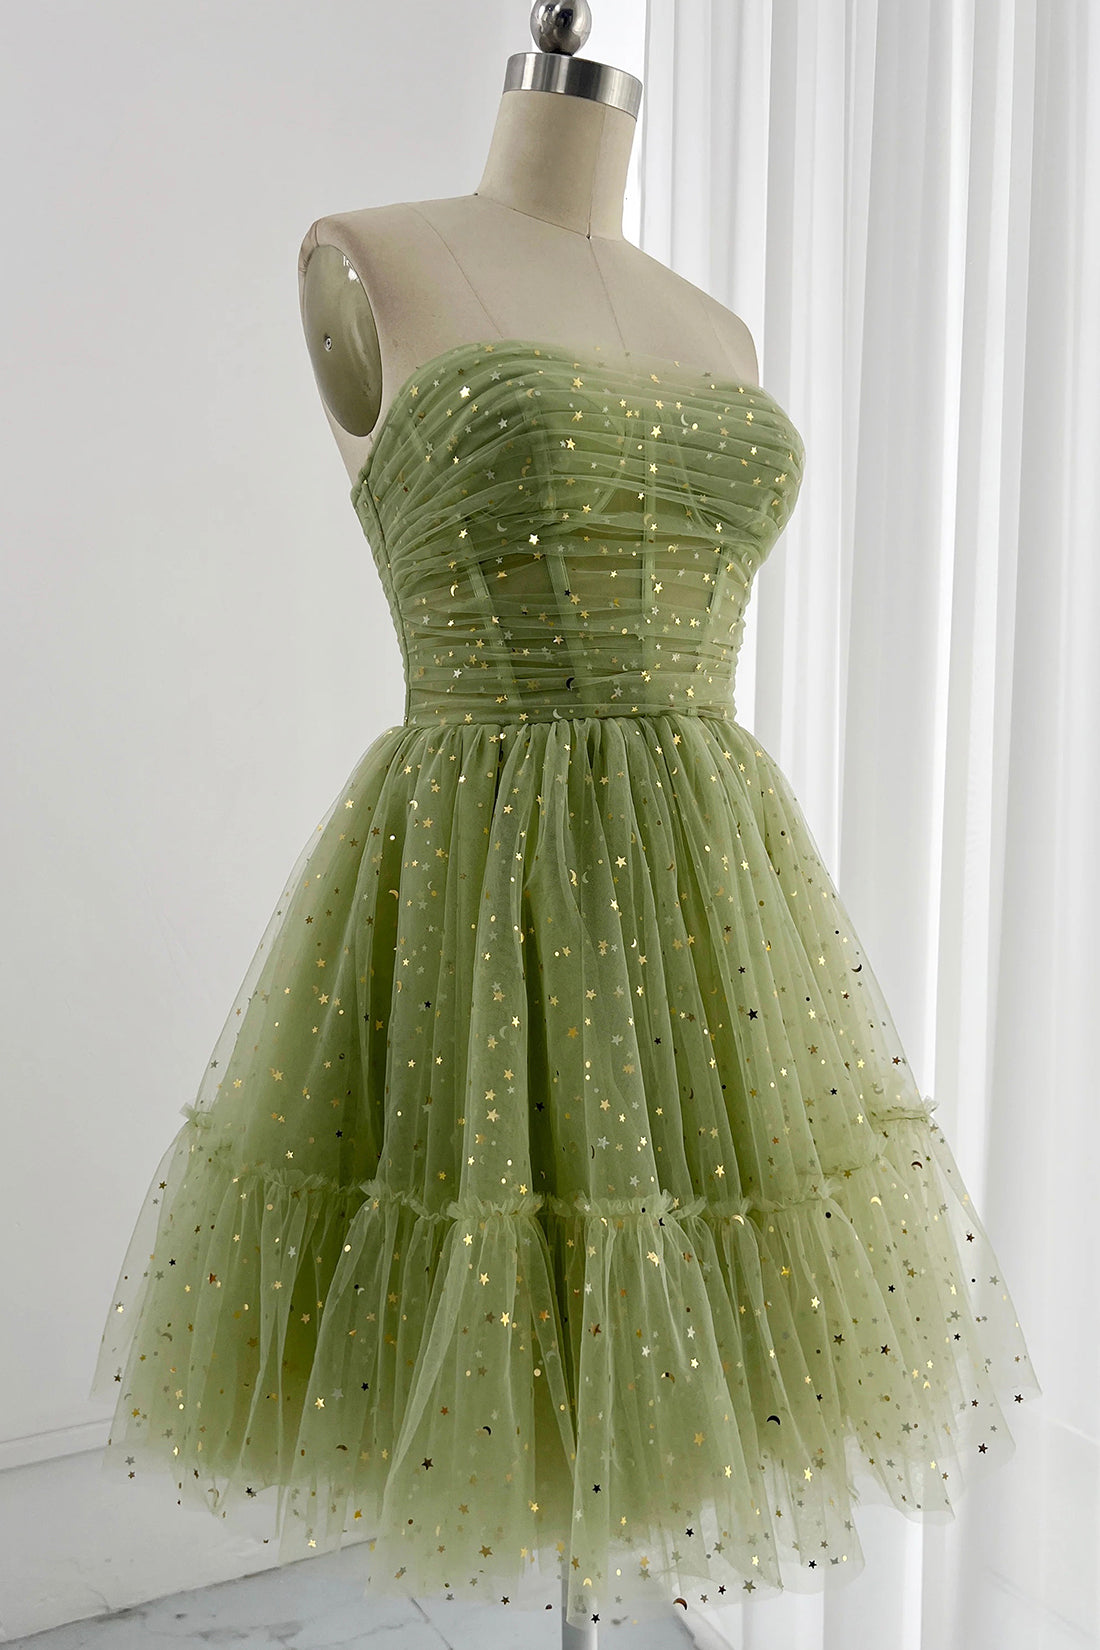 Green Tulle Knee Length Prom Dress, Cute A-Line Evening Party Dress